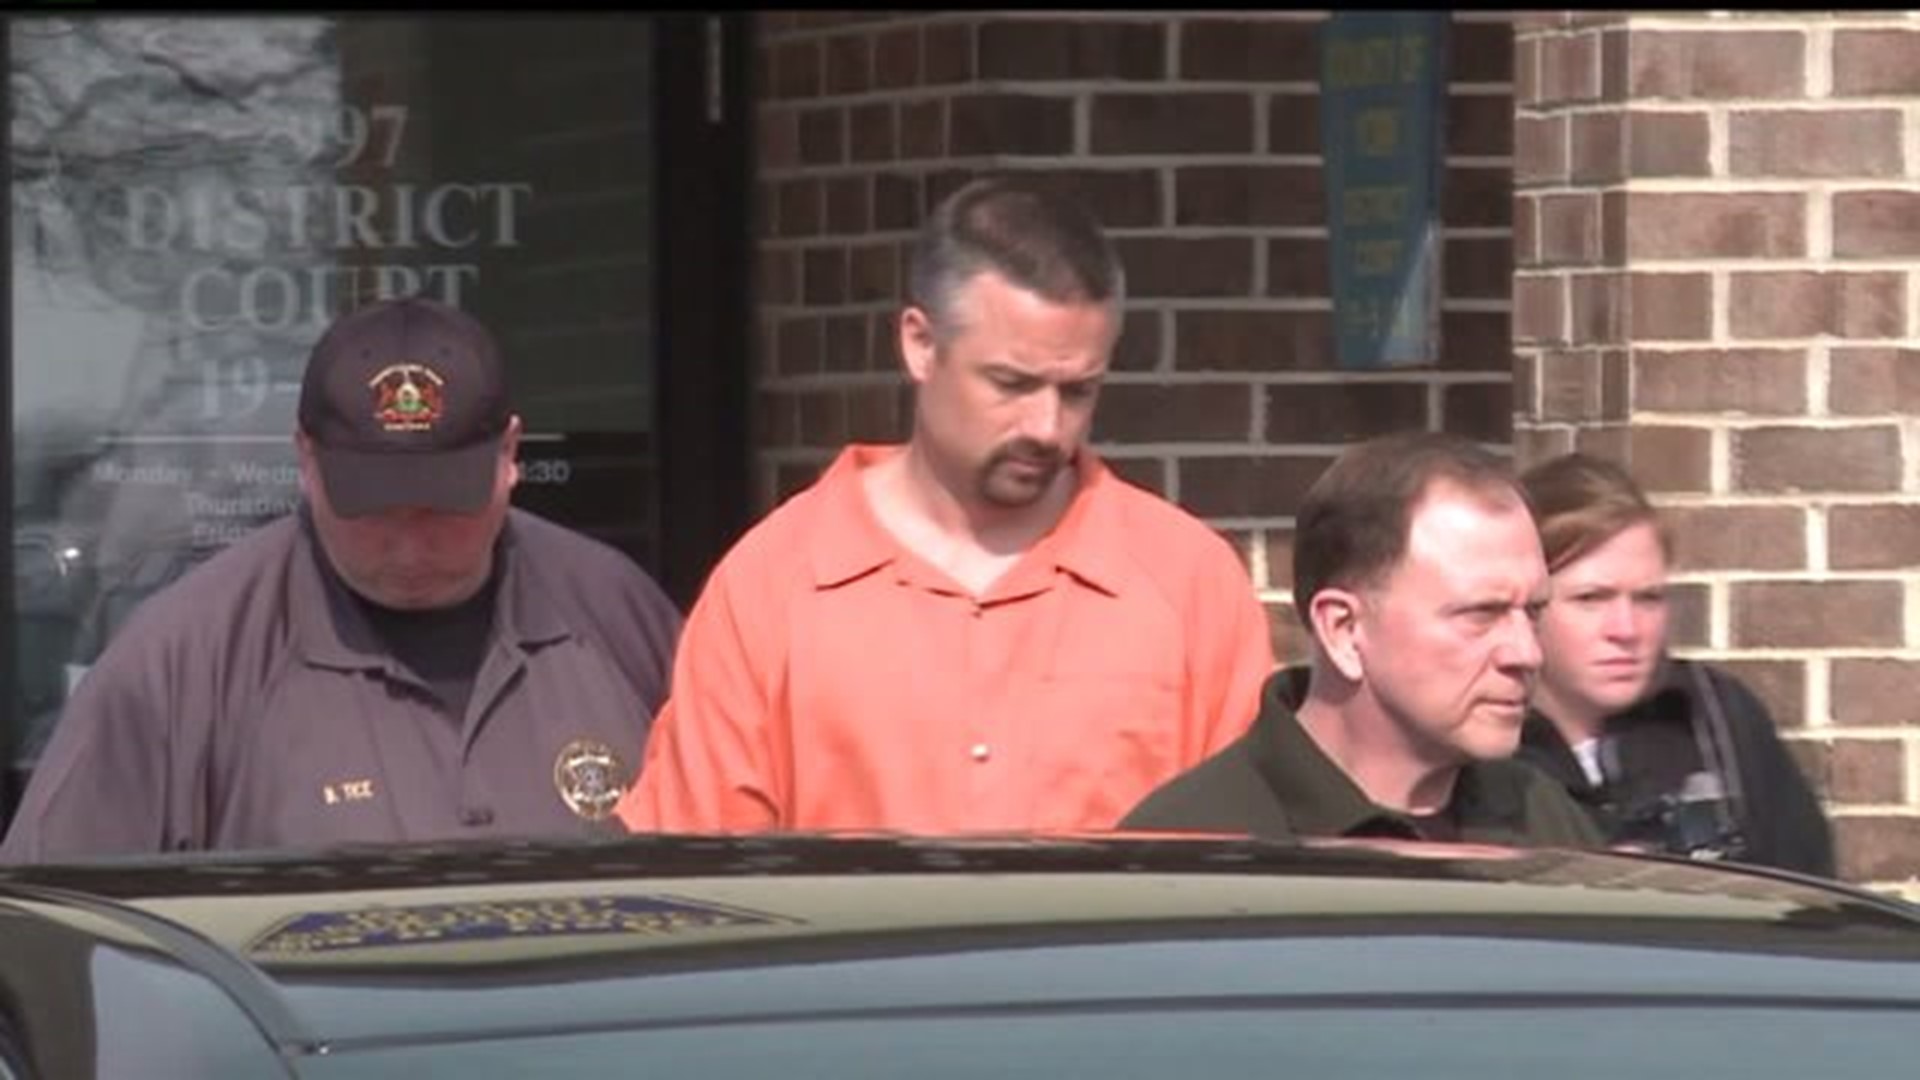 JOSEPH FITZPATRICK BRIEFLY RELEASED FROM PRISON